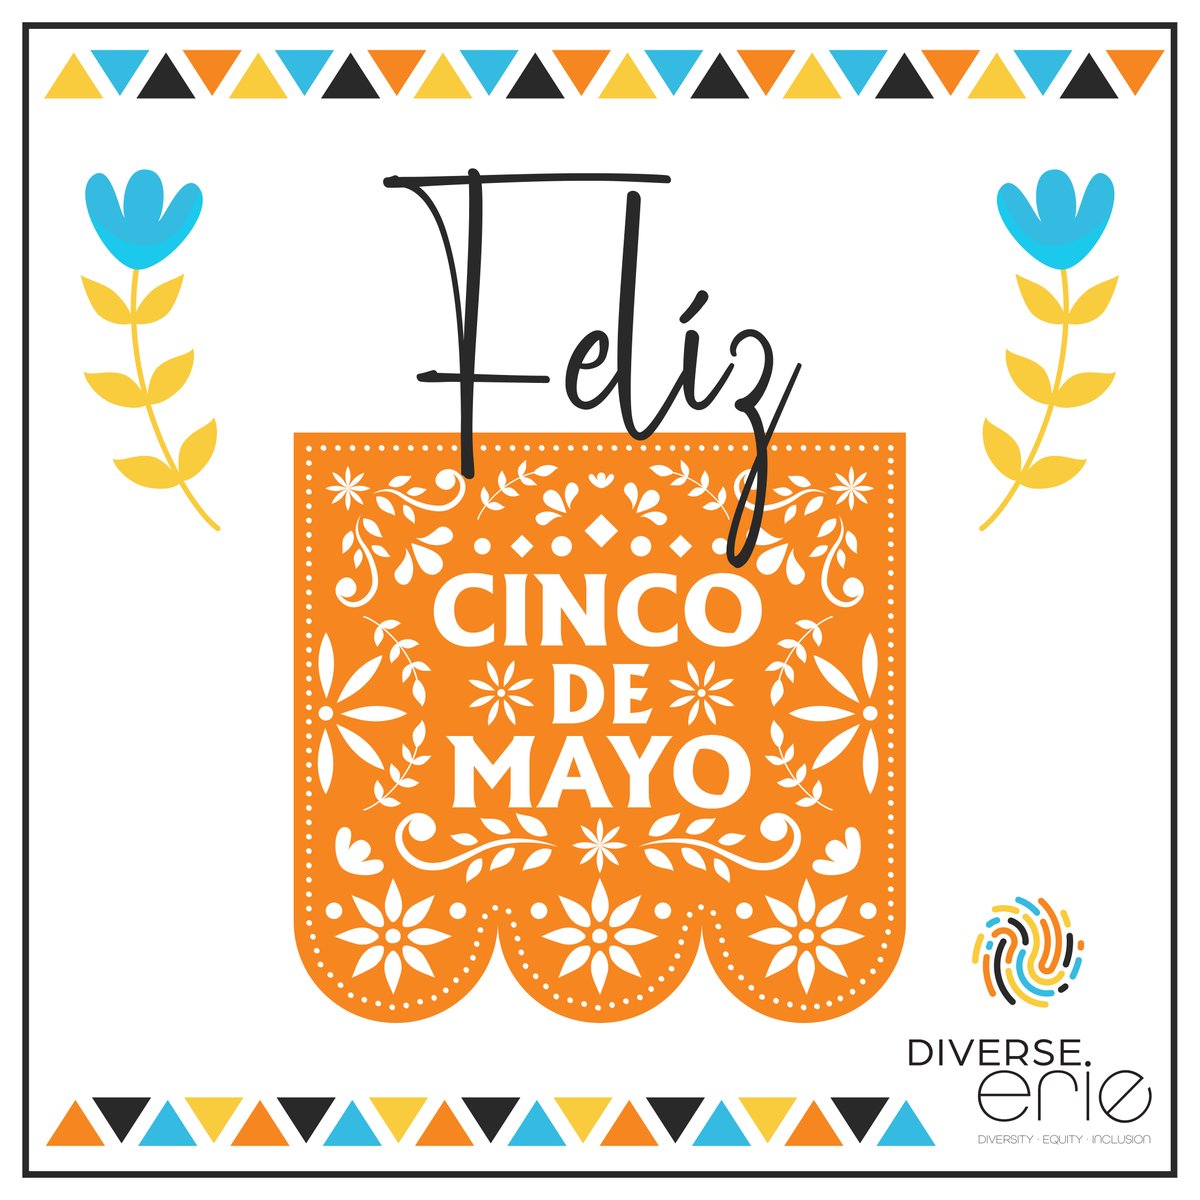 The 5th of May is celebrated in memory of the anniversary of Mexico's victory over the Second French Empire at the Battle of Puebla in 1862. ¡Viva México! 🇲🇽🎉

Join the #DiverseErie conversation. #DEI #CincoDeMayo